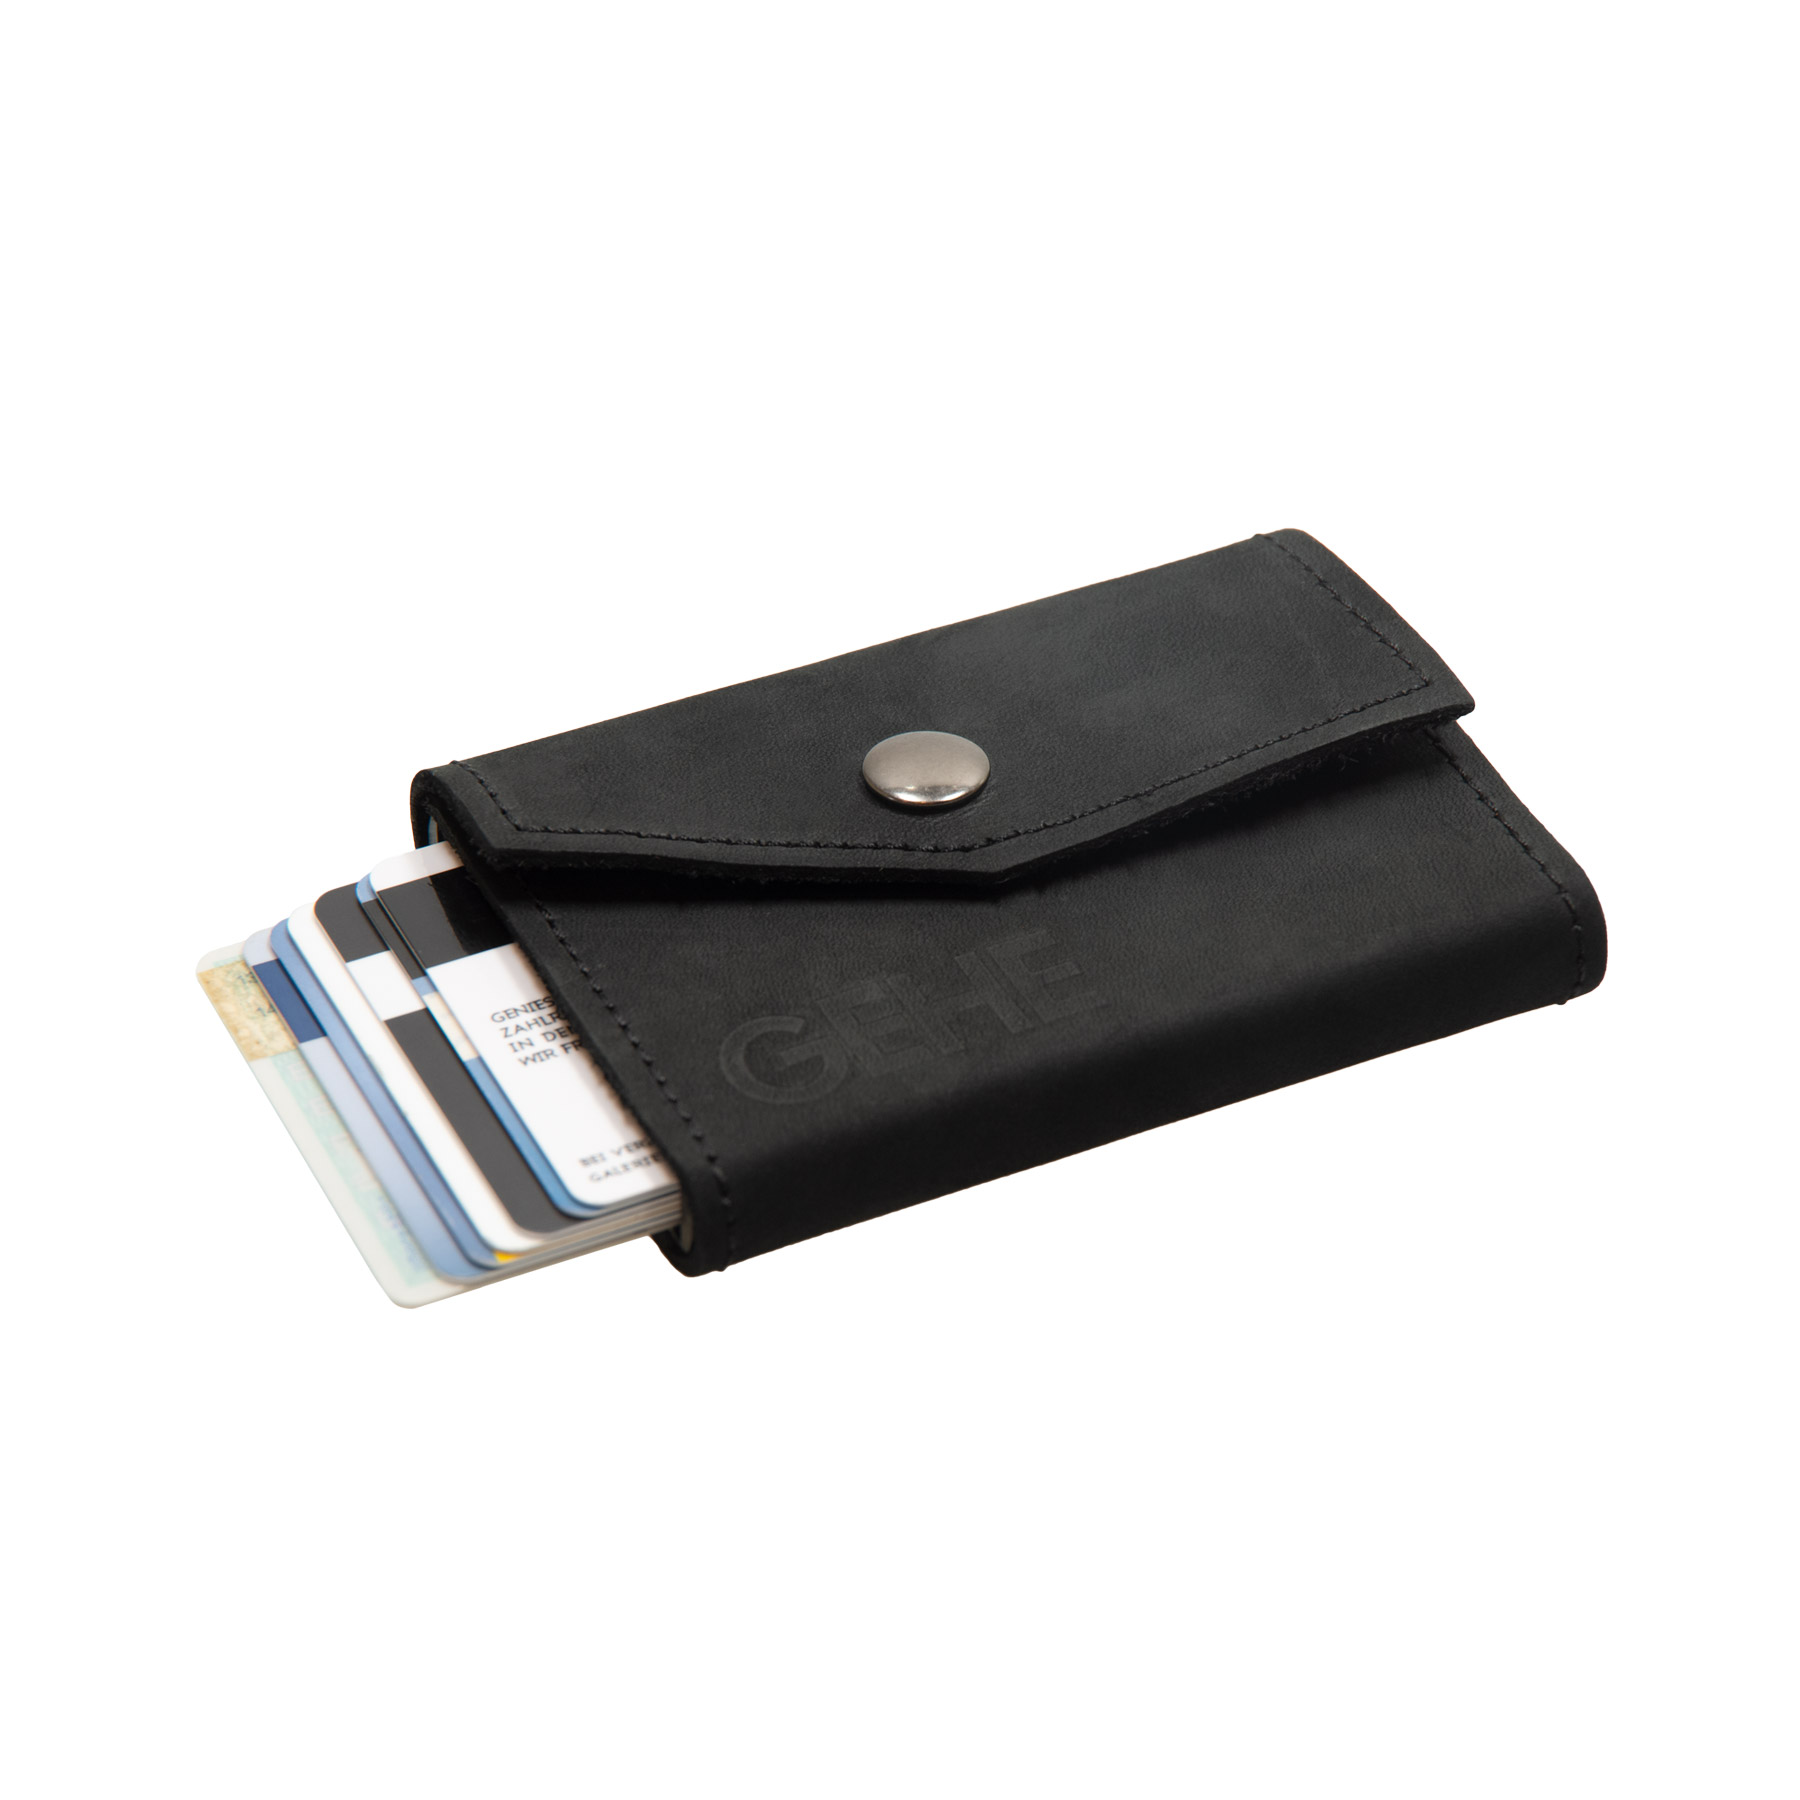 RFID cardholder made of leather and metal - SFP Hospitality GmbH